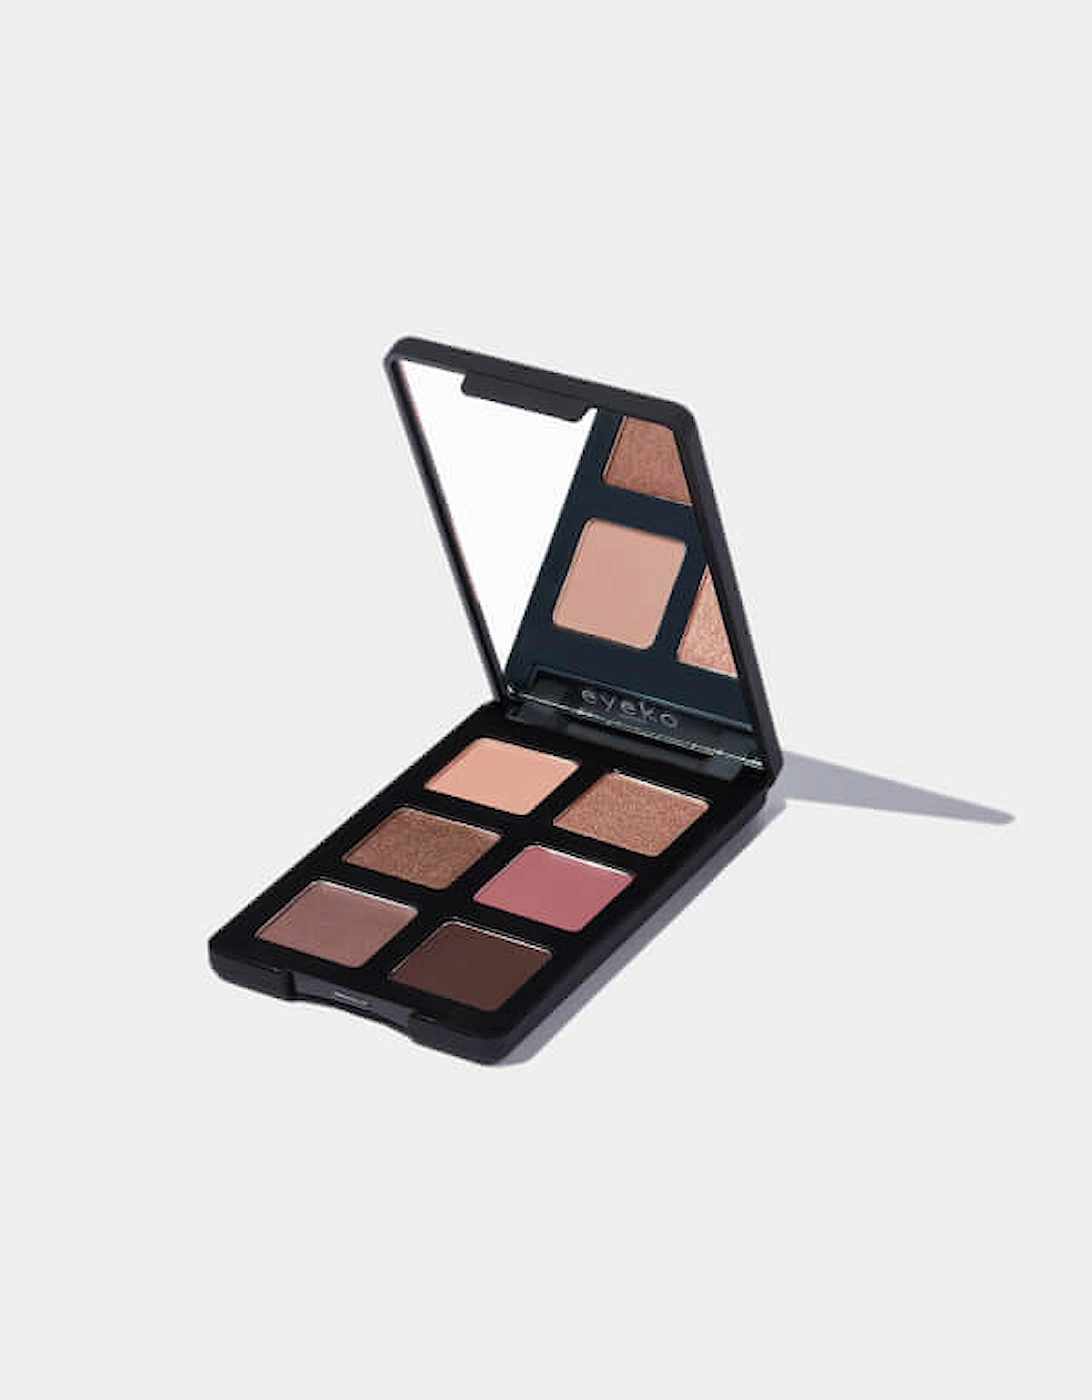 Limitless Eyeshadow Palette - Concrete Pink, 2 of 1